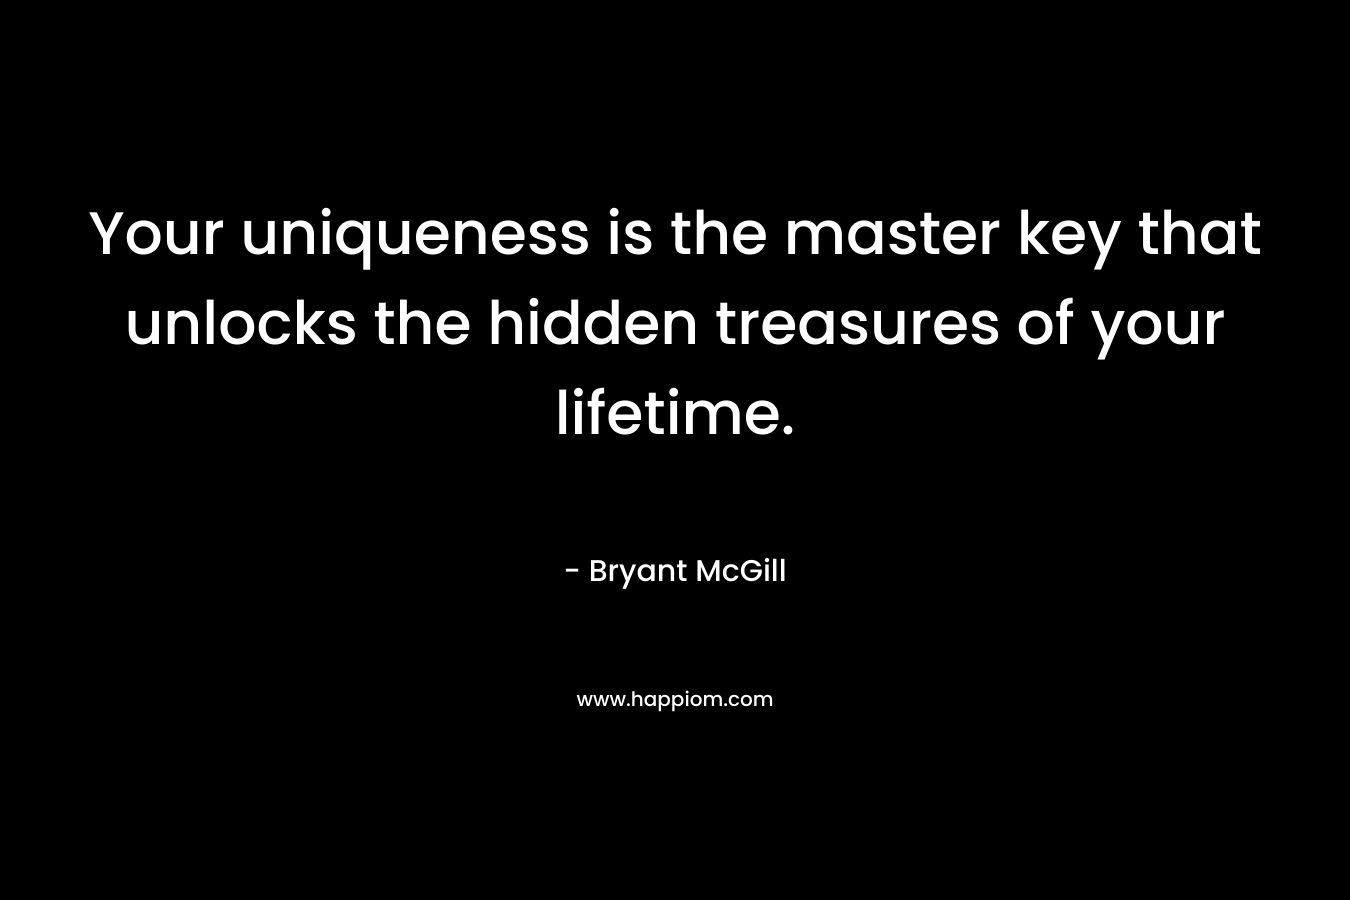 Your uniqueness is the master key that unlocks the hidden treasures of your lifetime. – Bryant McGill